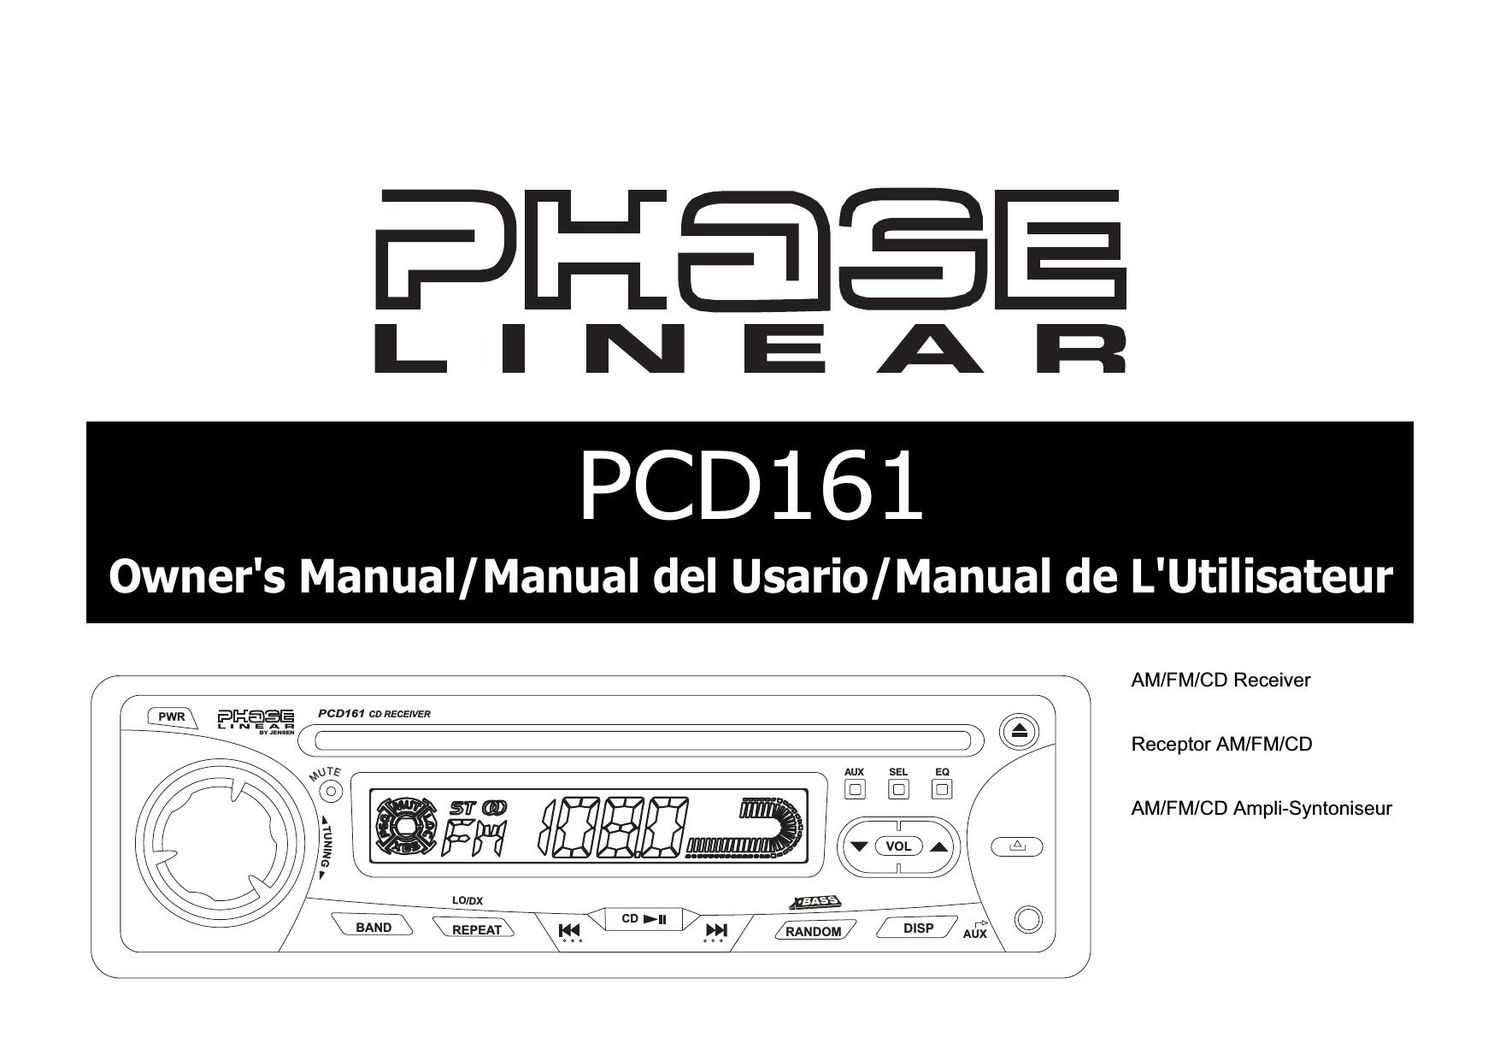 Phase Linear PCD 161 Owners Manual